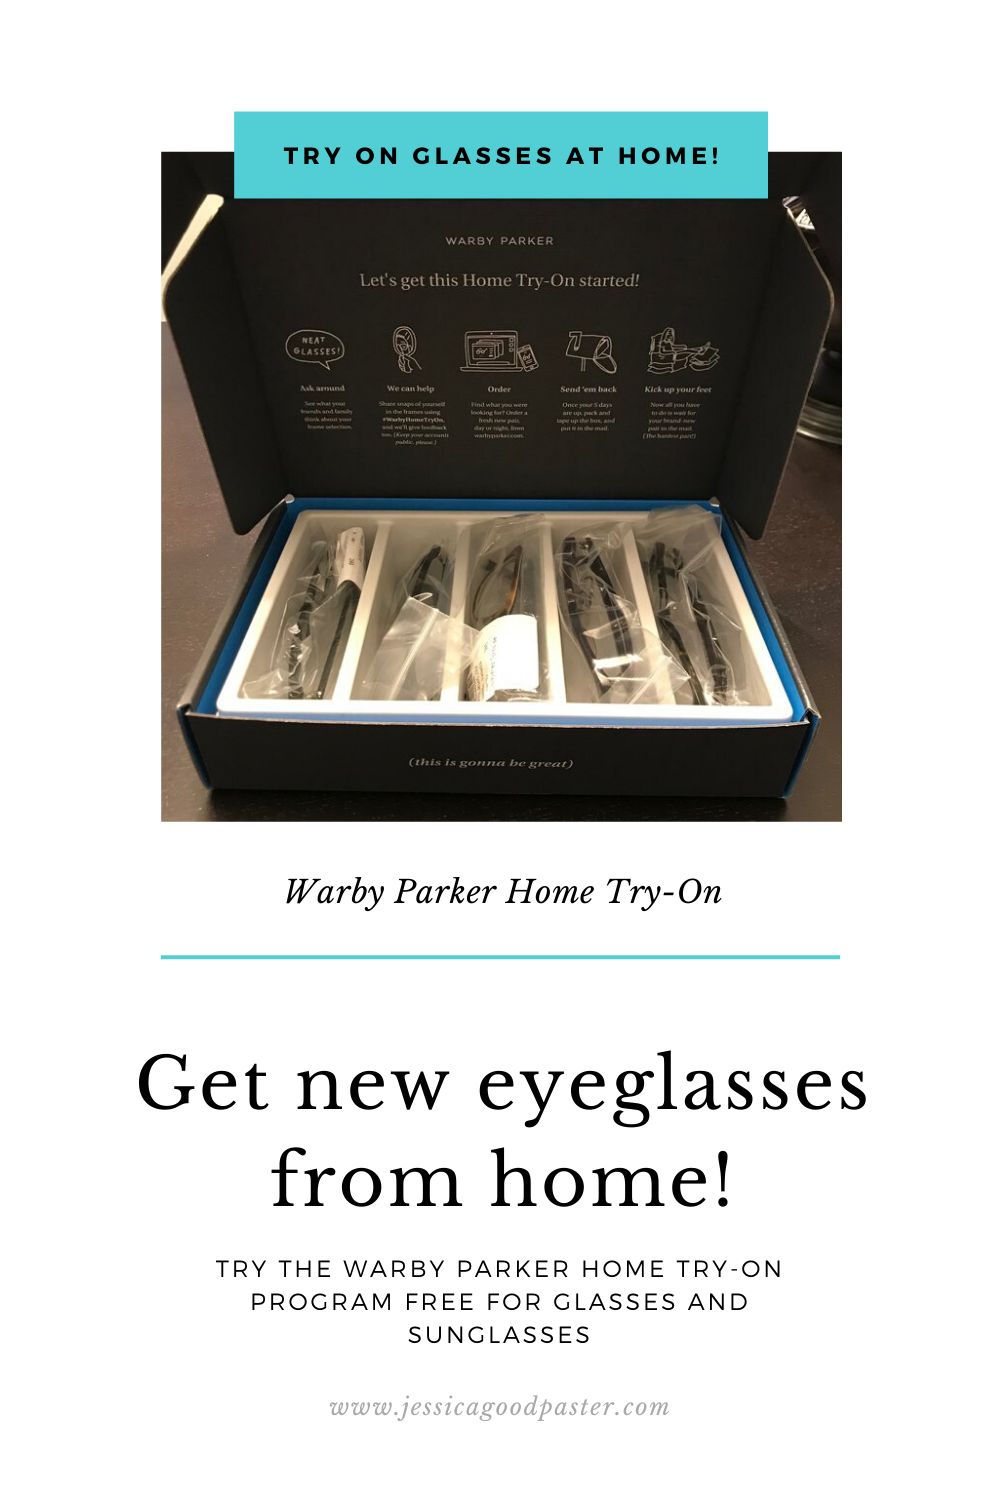 Shop for Prescription Glasses from Home -  A Warby Parker Review | It is possible to find affordable eyeglasses for women, men, and children online. Read this for my experience with the trendy eyewear company. #glasses #glassesframes #warbyparker #glasseschain #eyeglasses #stayathome #savemoney